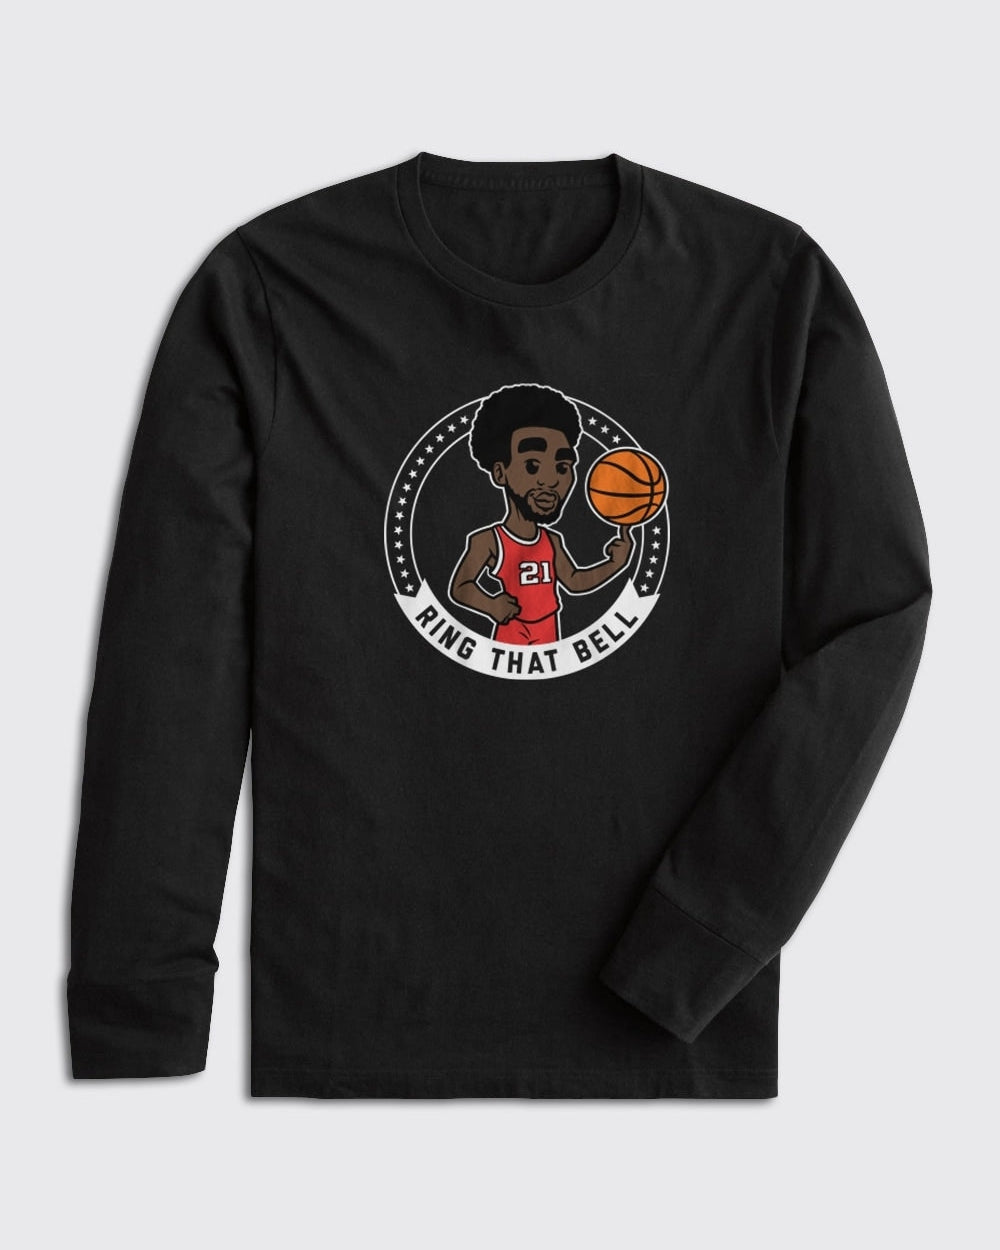 Embiid Ring That Bell Long Sleeve-Philly Sports Shirts